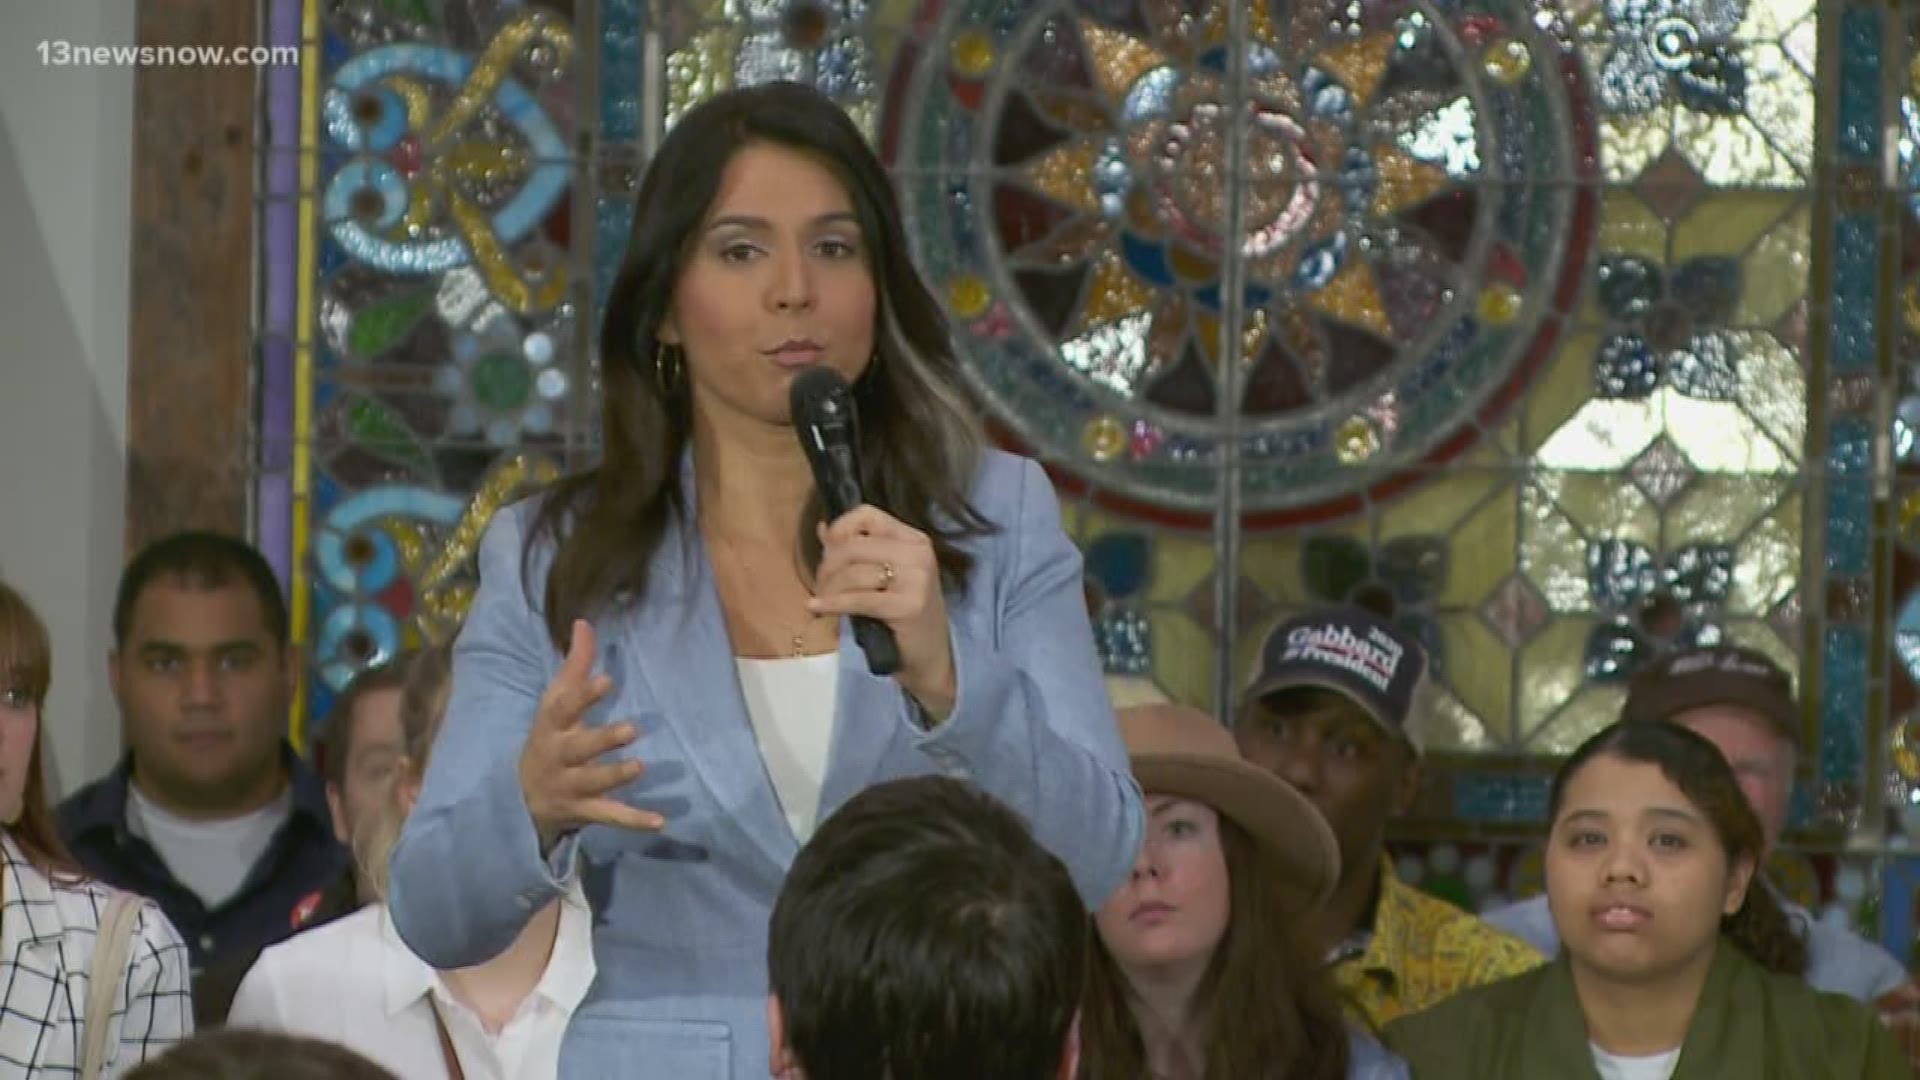 Rep. Tulsi Gabbard spoke at the Virginia Beach Oceanfront while her opponents battled it out on the debate stage about 450 miles south in Charleston, South Carolina.